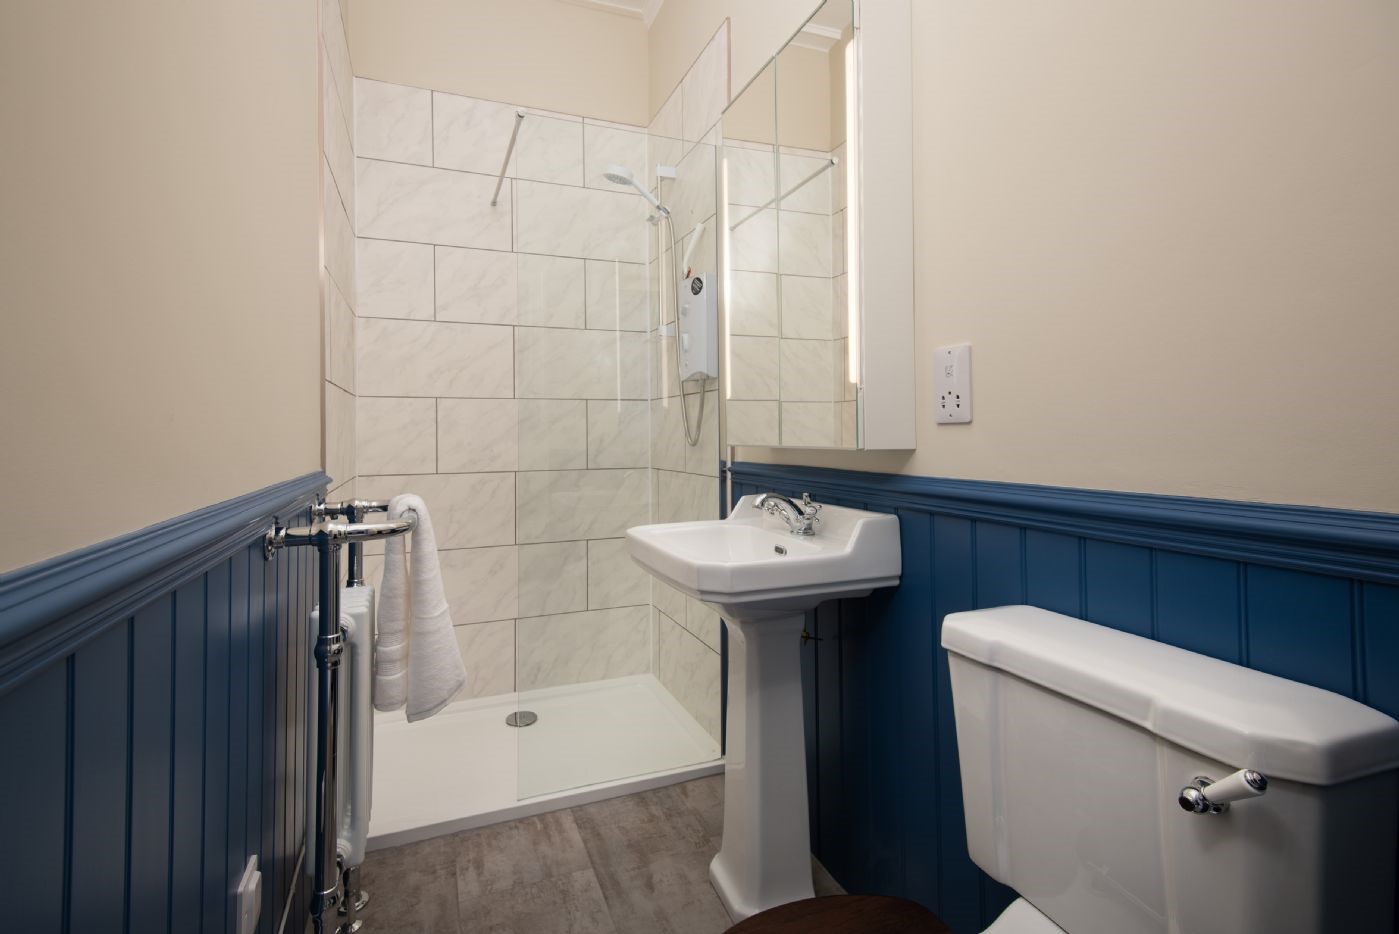 East House - bedroom four en suite bathroom with walk-in shower, WC and basin